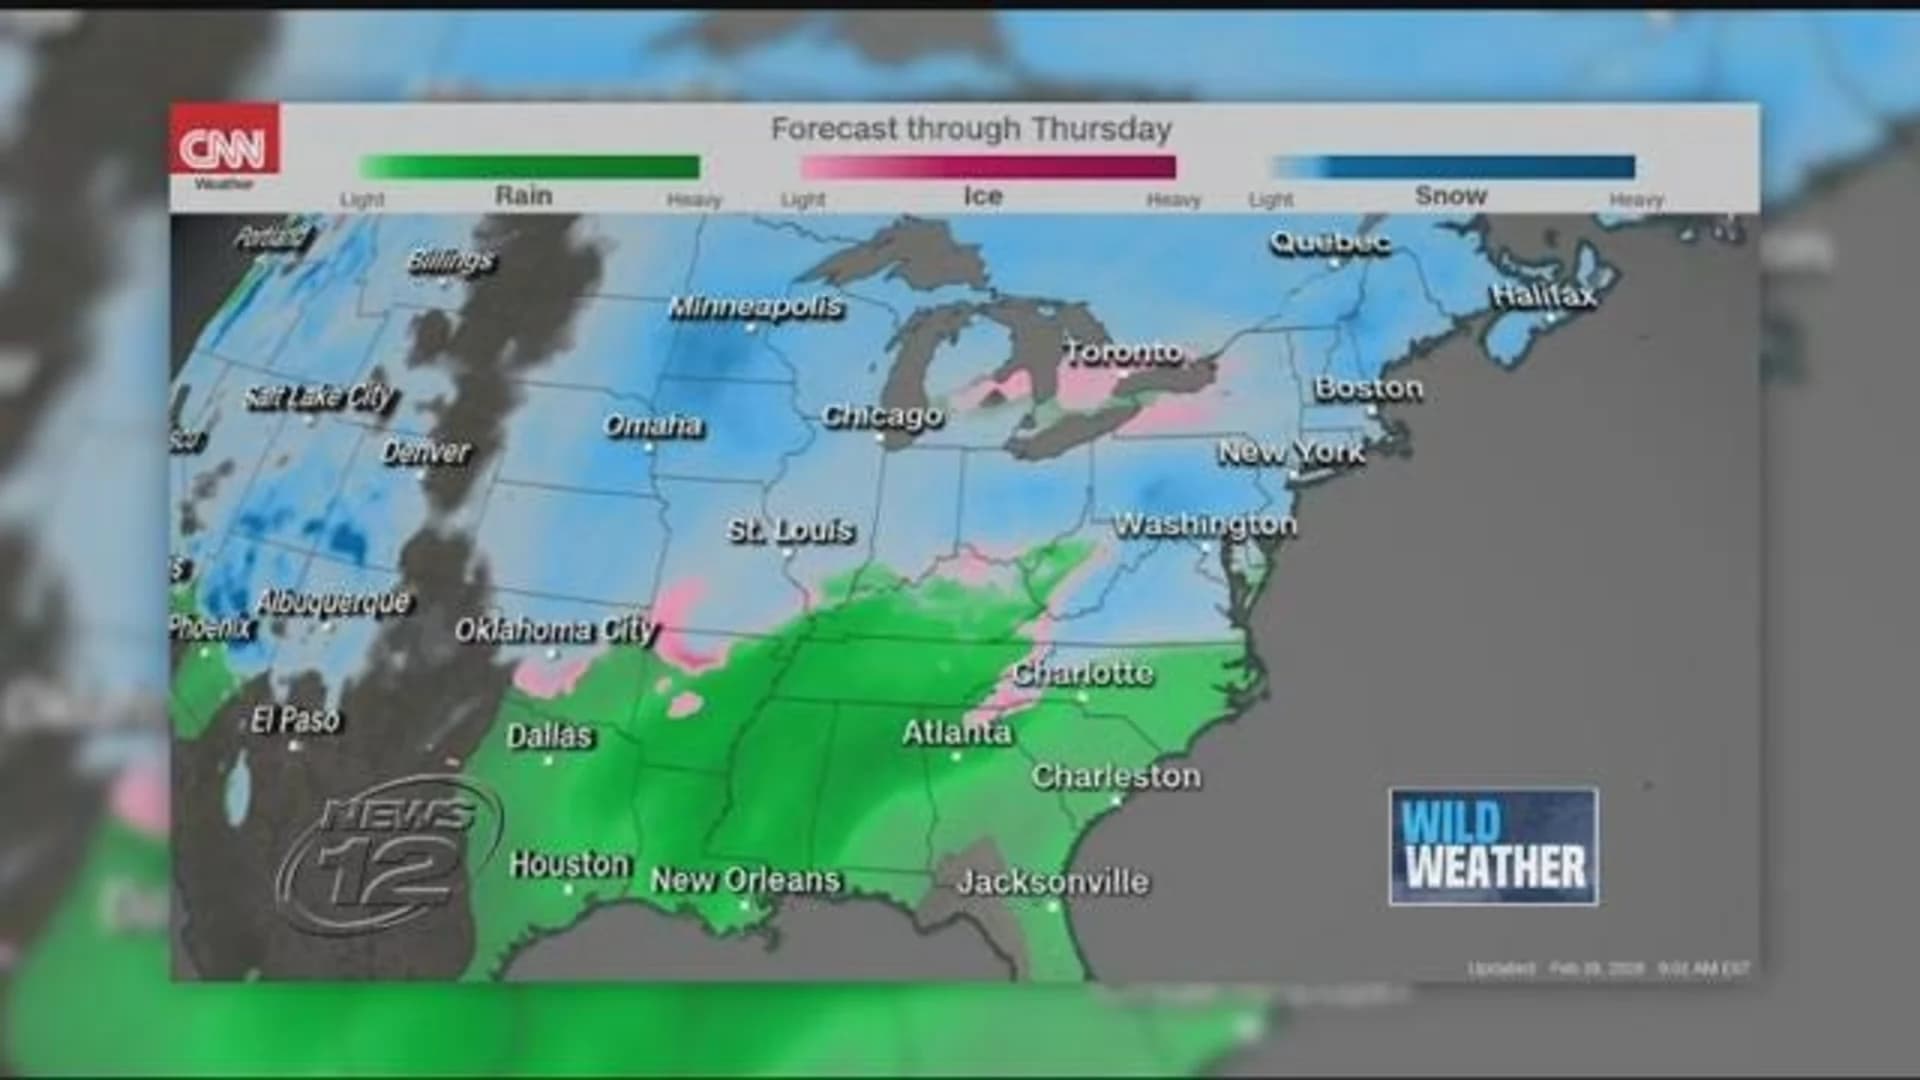 Storm to impact millions from the Plains to the Northeast